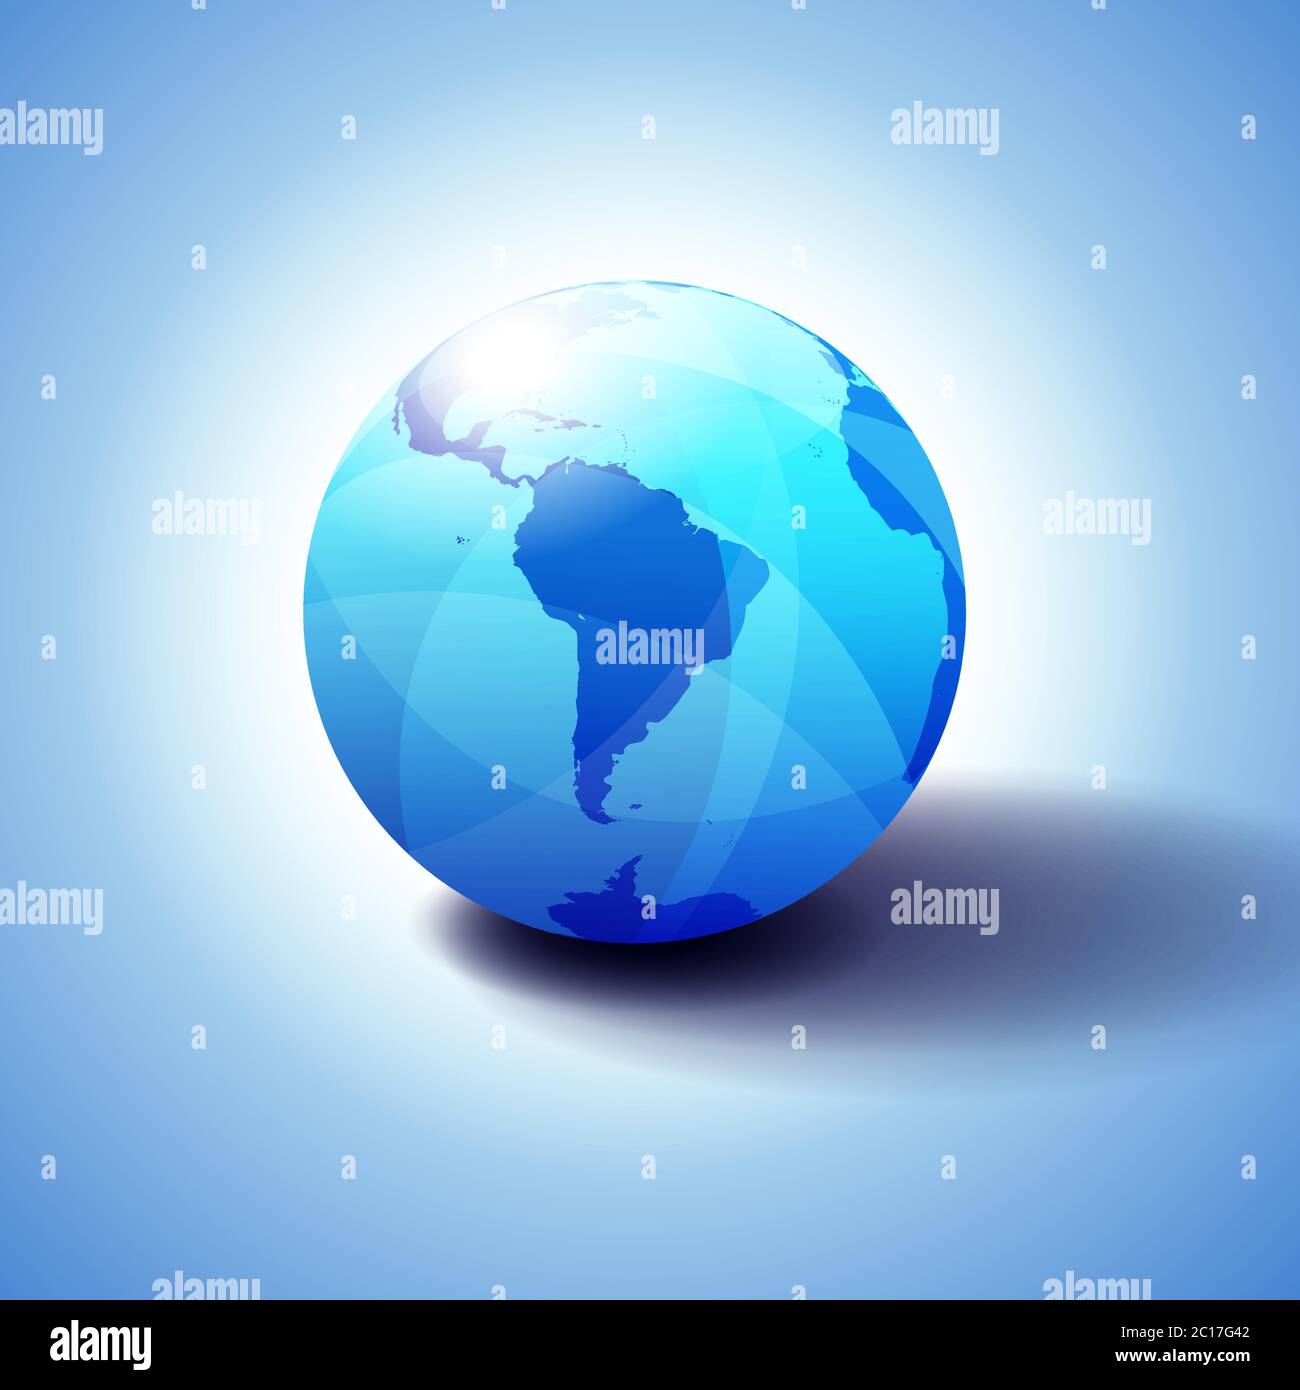 South America Background with Globe Icon 3D illustration, Glossy, Shiny Sphere with Global Map in Subtle Blues giving a transparent feel Stock Vector